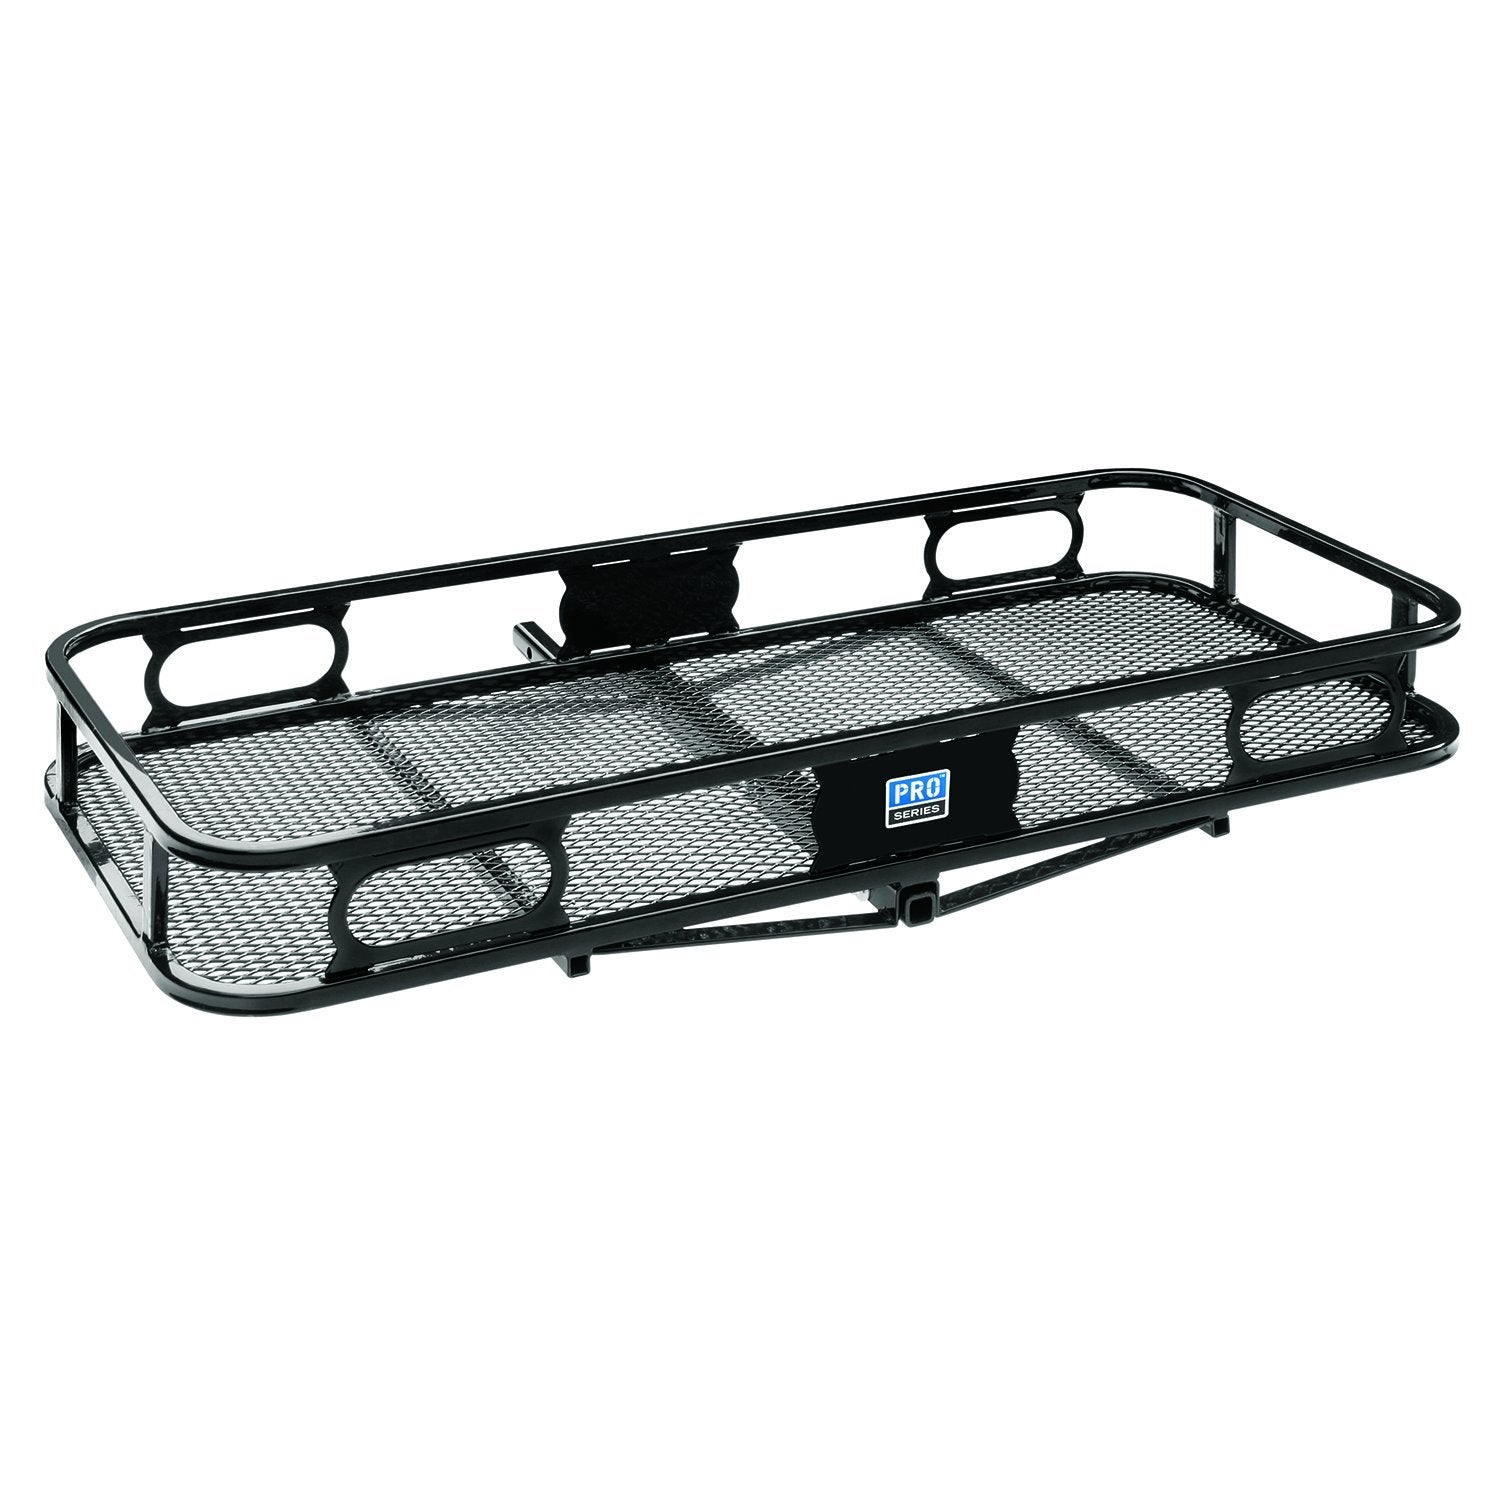 Pro Series 63155 Rambler Hitch Cargo Carrier for 1-1/4 Receivers, Black